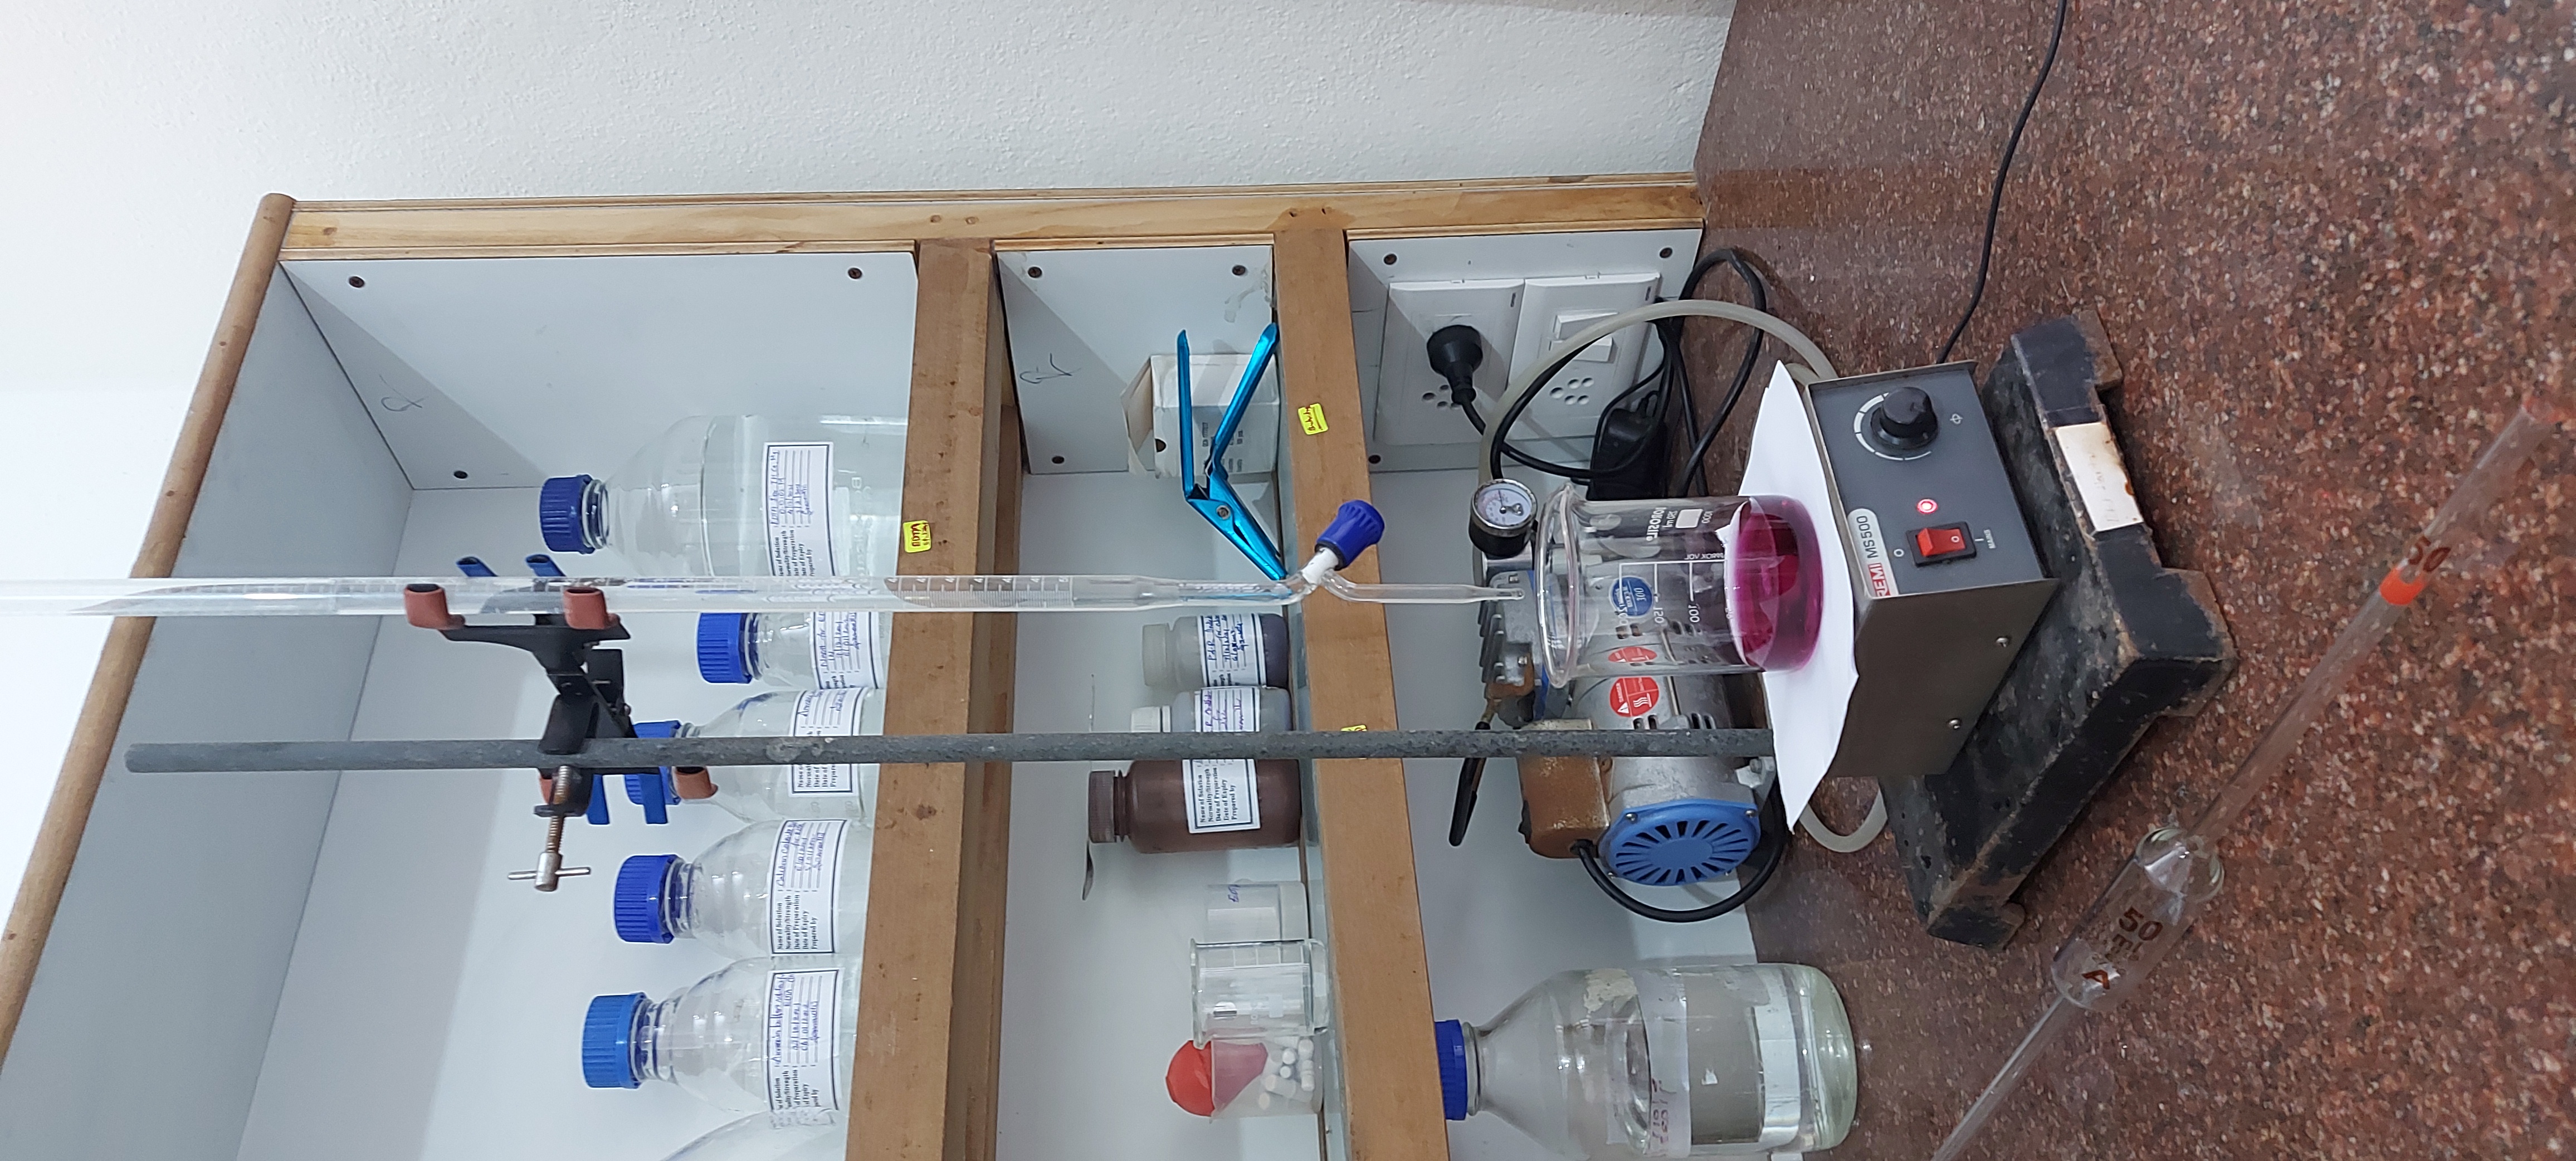 Another photo of chemlab titration station